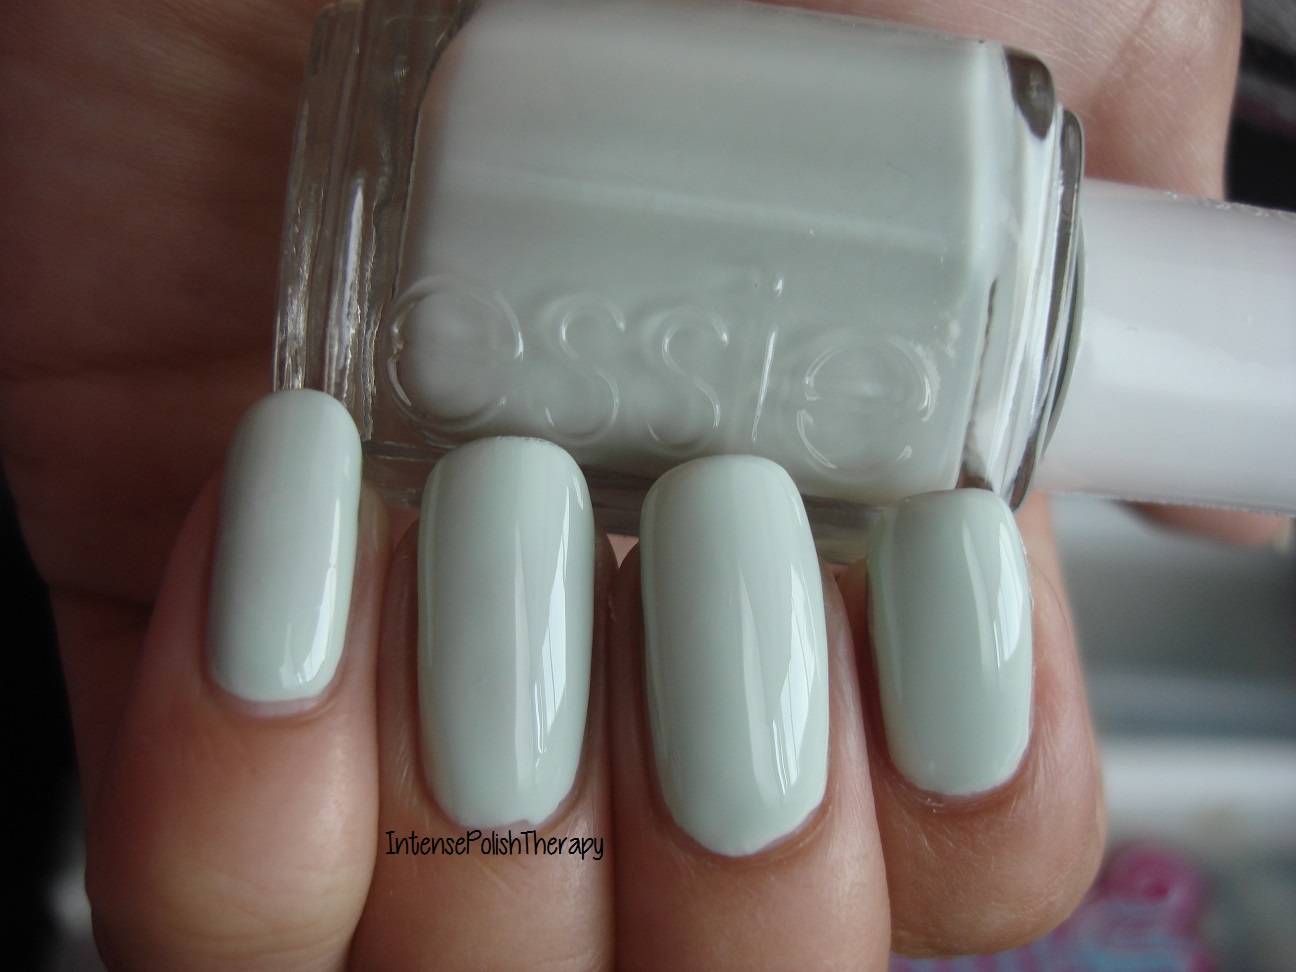 Essie - Absolutely Shore